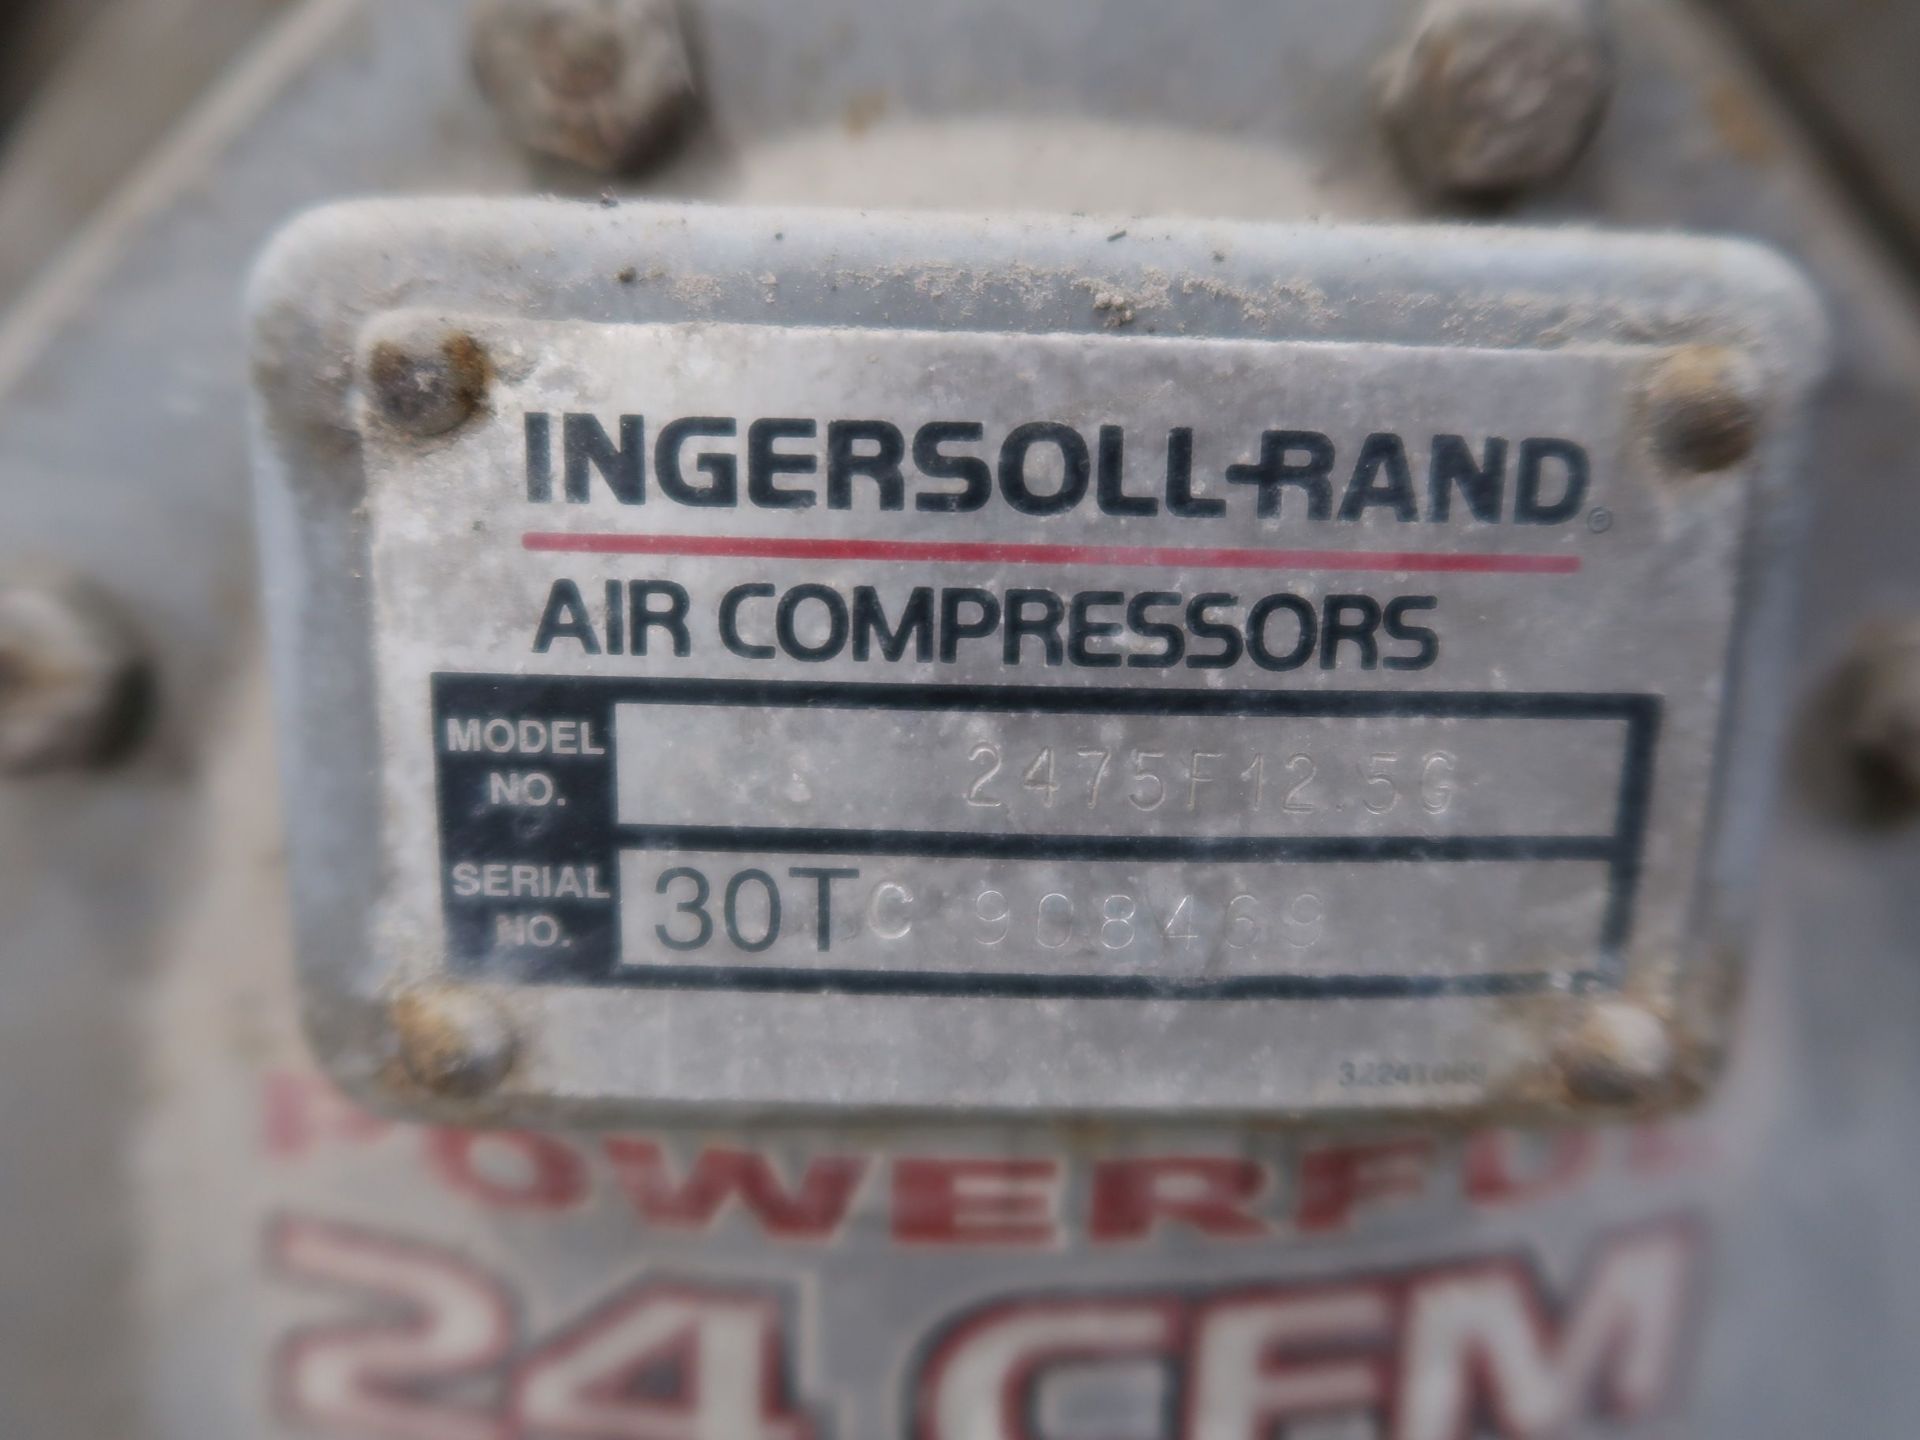 12.5 HP INGERSOLL RAND MODEL T30 GAS POWERED HORIZONTAL TANK AIR COMPRESSOR - Image 2 of 2